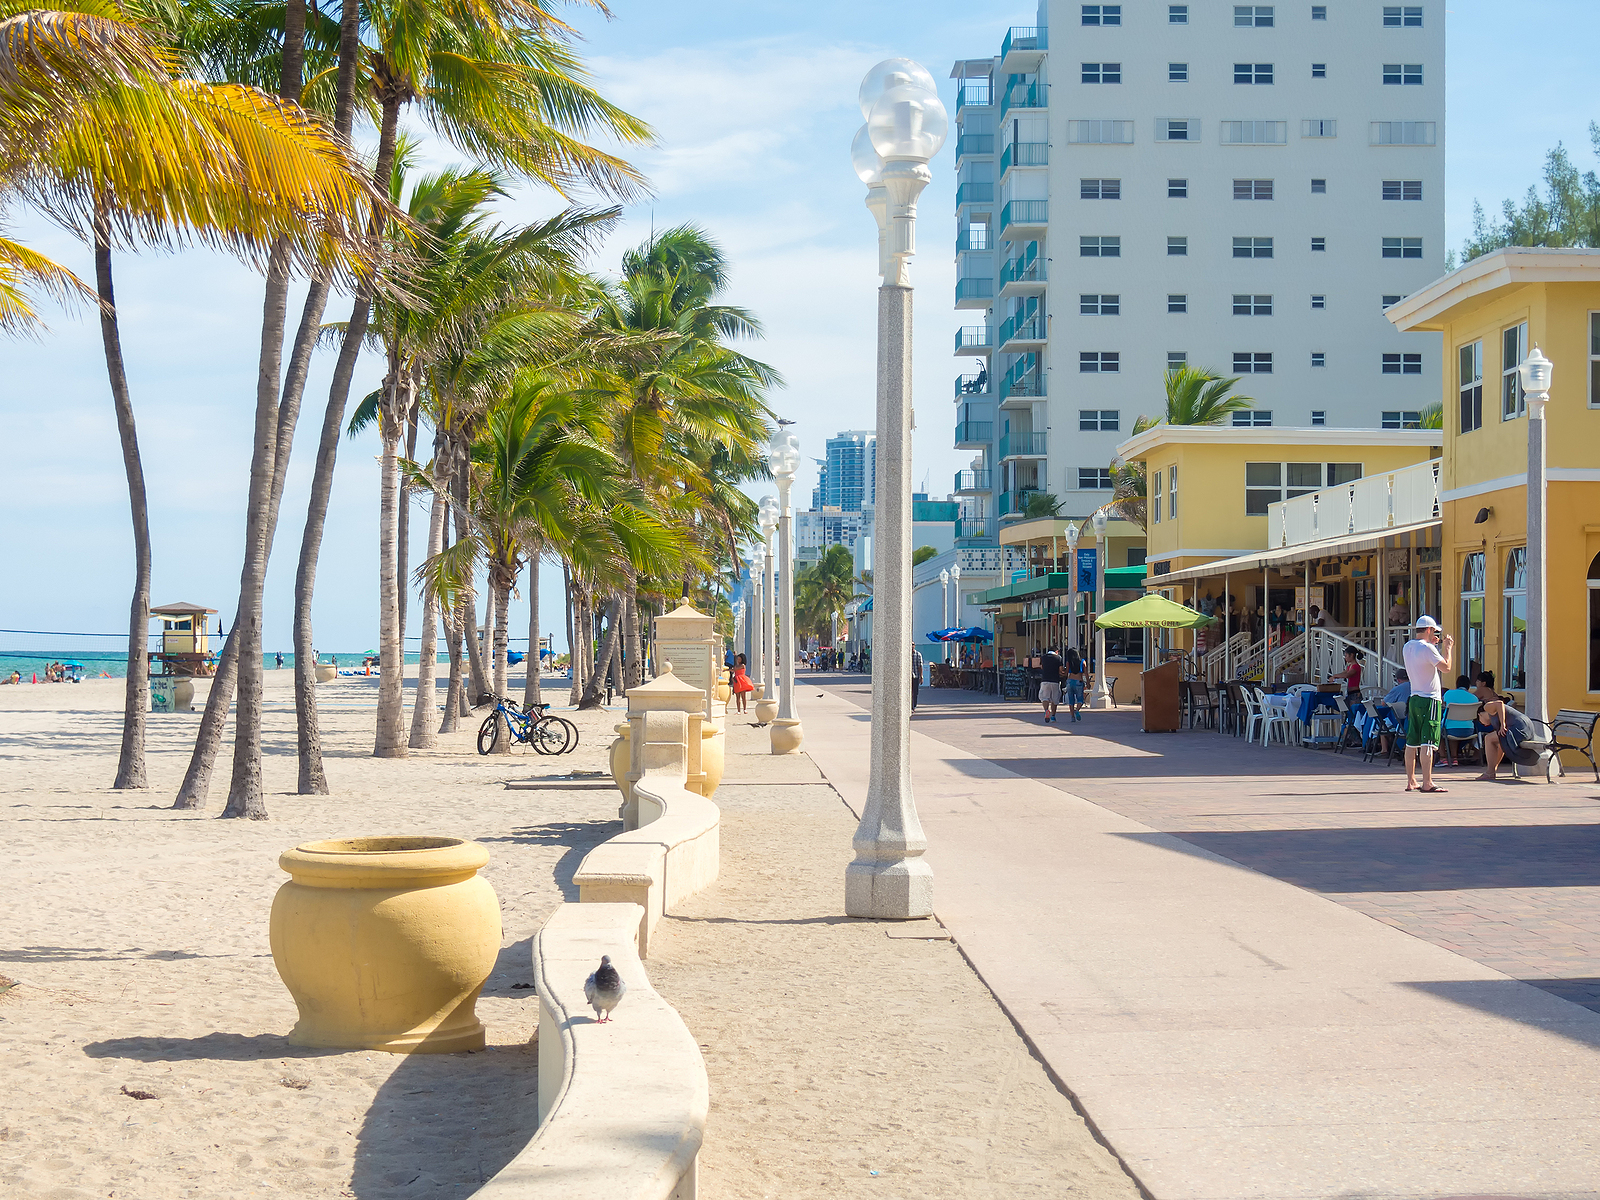 HOLLYWOOD BEACH,USA - AUGUST 25,2015 : The famous Hollywood Beach boardwalk in Florida on a summer day